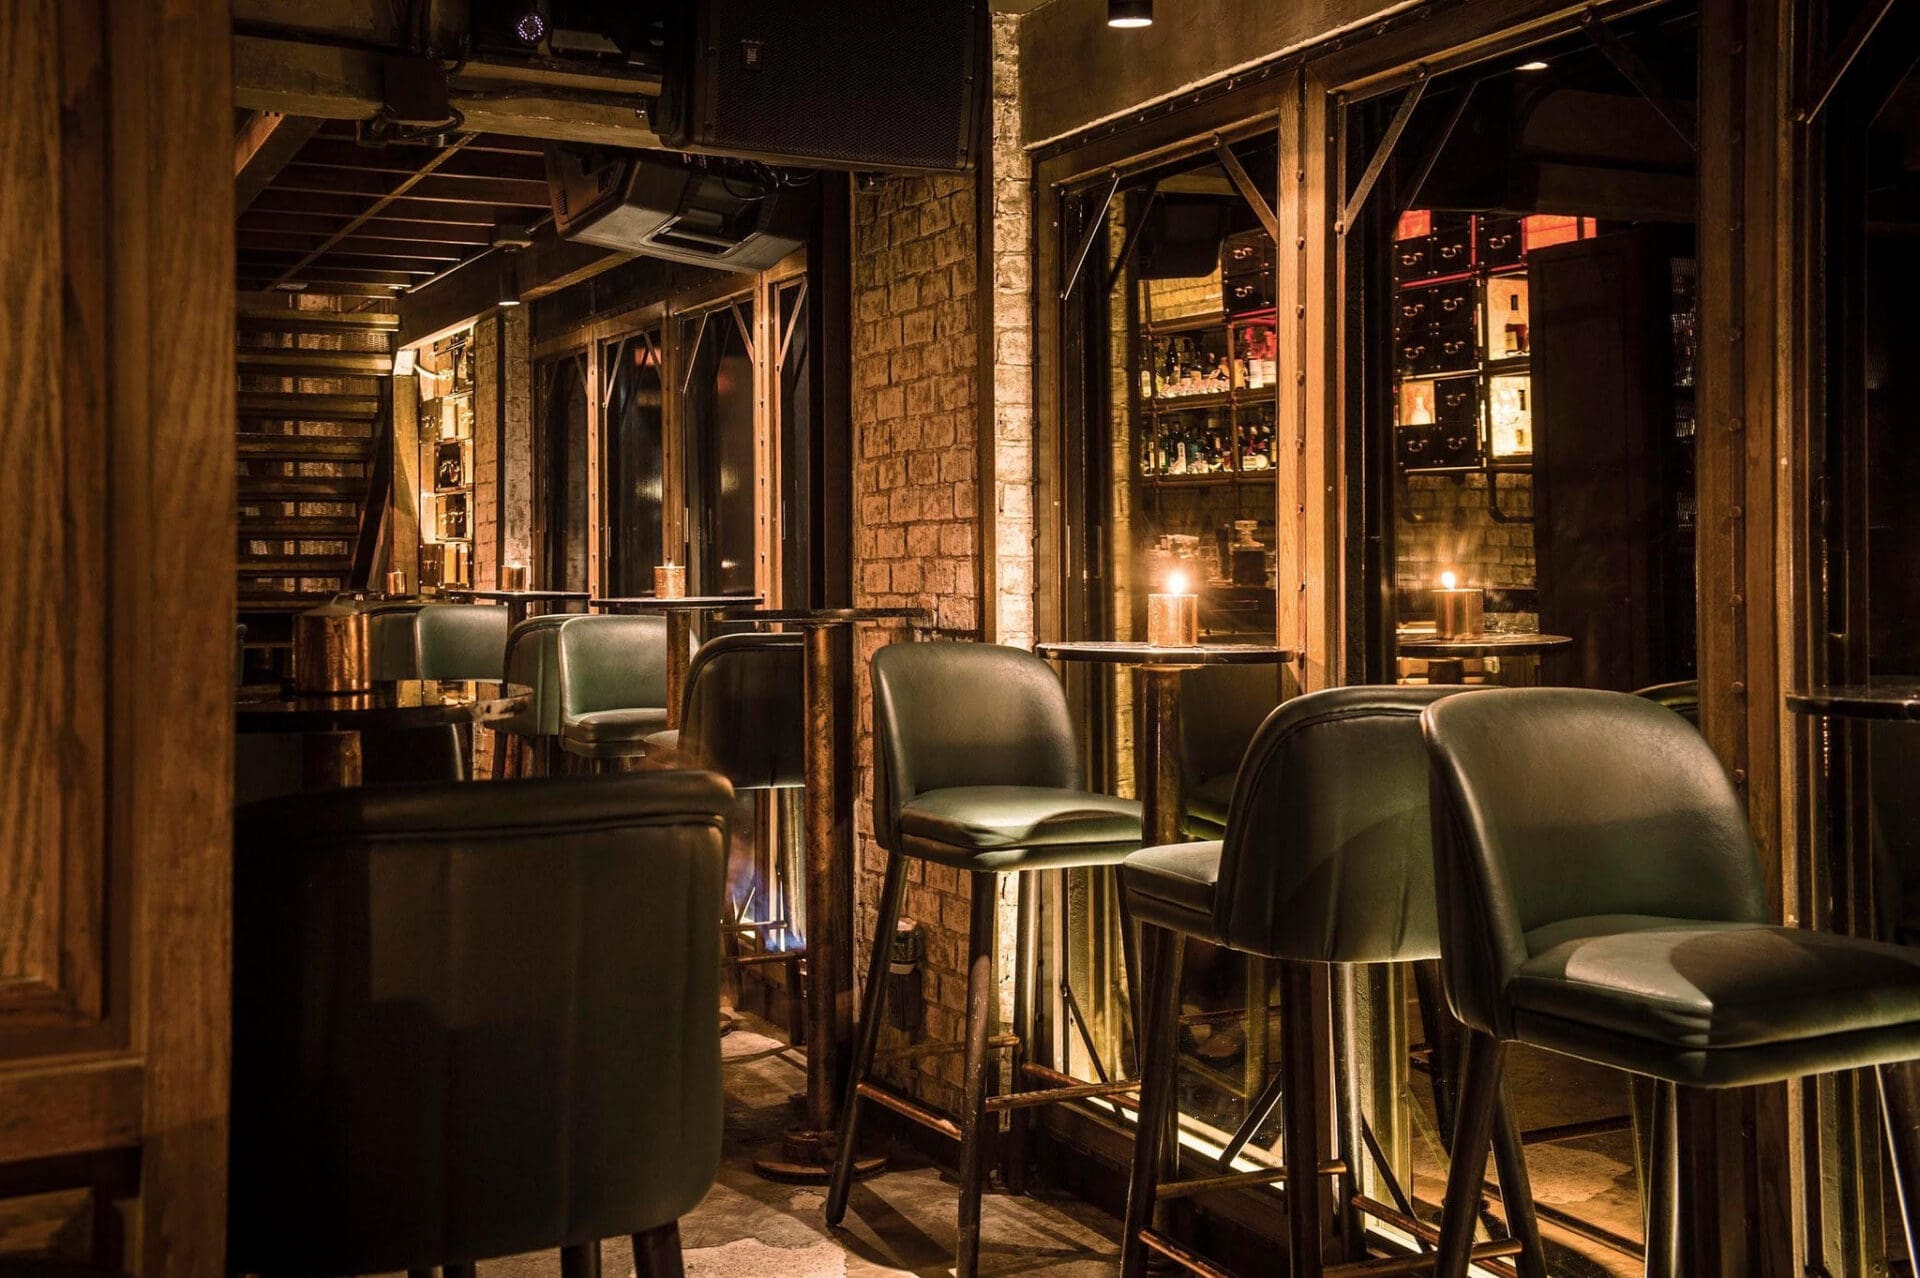 Bangkok's best bars | Leather high chairs and mirrors at Rabbit Hole bar